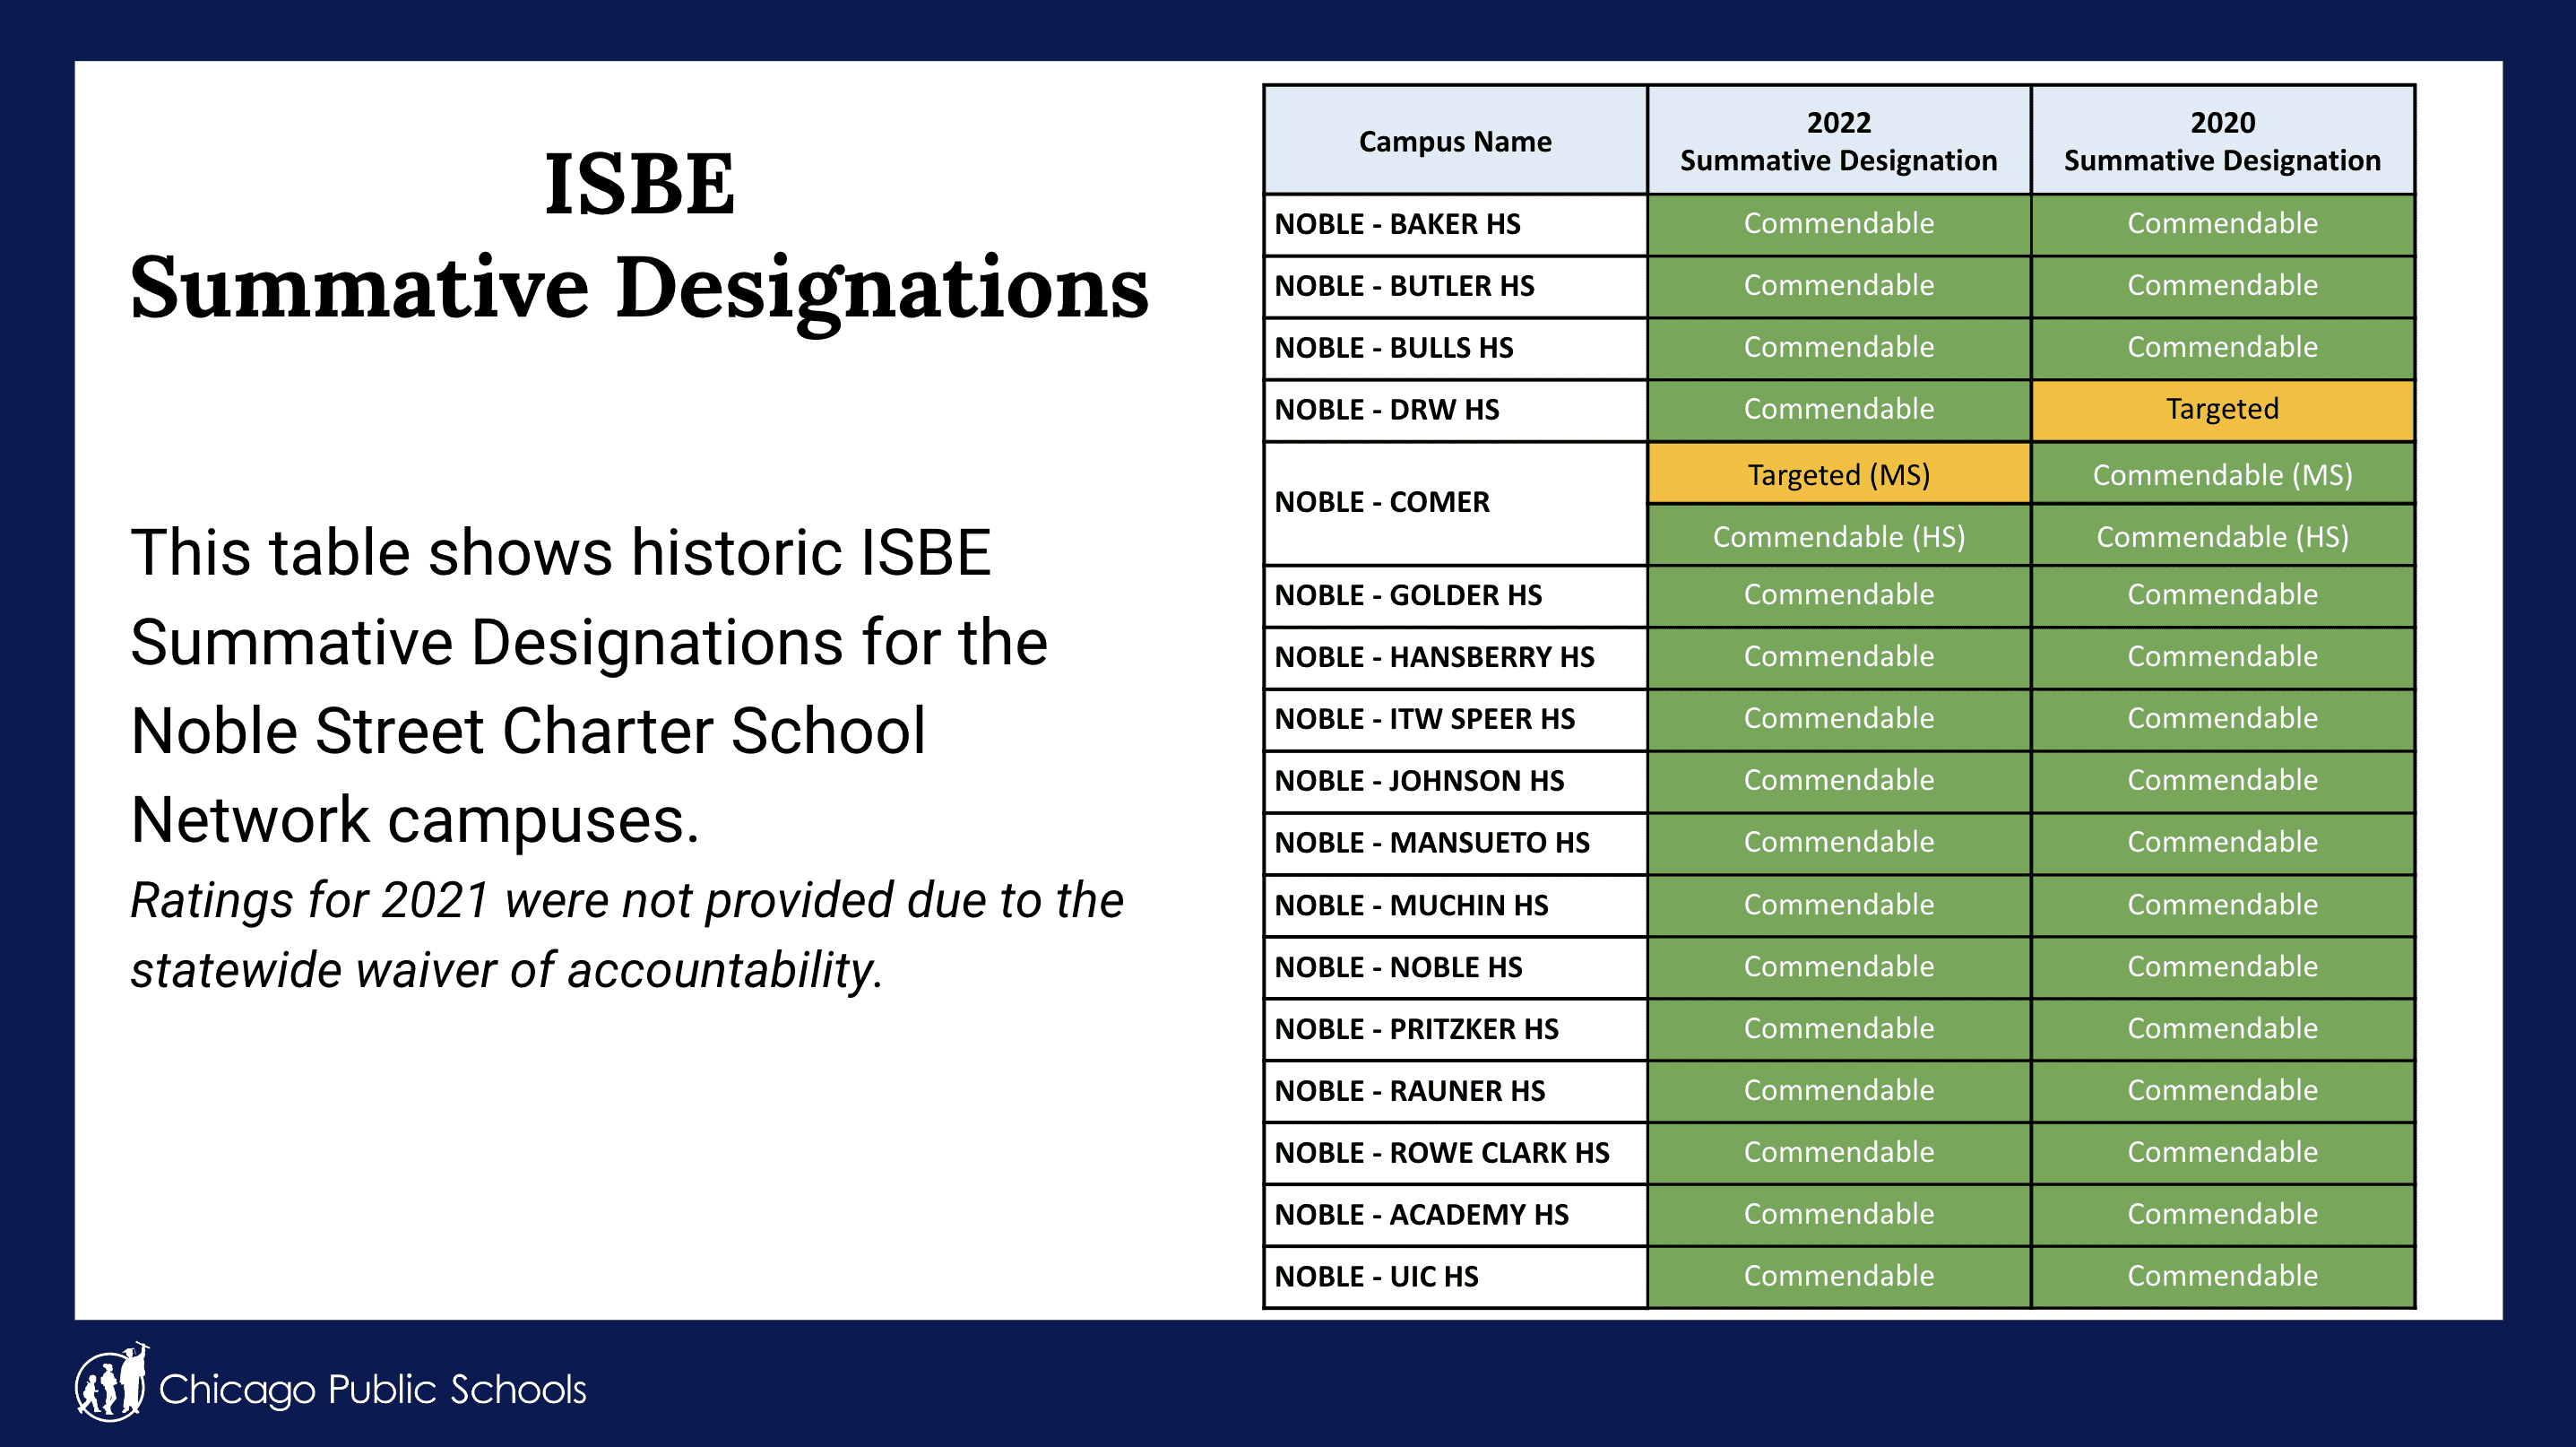 This graphic is titled "Illinois State Board of Education Summative Designations". Beneath the title is a description that says "This table shows historic Illinois State Board of Education summative designations for the Noble Street Charter School Network campuses. Ratings from 2021 were not provided due to the statewide waiver of accountability.". To the right of this text is a table that shows the academic assessment results of all Noble campuses in the years 2020 and 2022. In 2022, almost all campuses are in green and say "Commendable" except for one -- Gary Comer Middle School is in yellow and says "Targeted" -- which means that the school is receiving targeted support to get them back up to academic standards. In the second column for the 2020 school year, almost all campuses are in green and say "Commendable" except for DRW College Prep -- which is yellow and says "Targeted". It is important to note that DRW College Prep went from needing support in academics in 2020 to being commendable in academic performance in 2022.